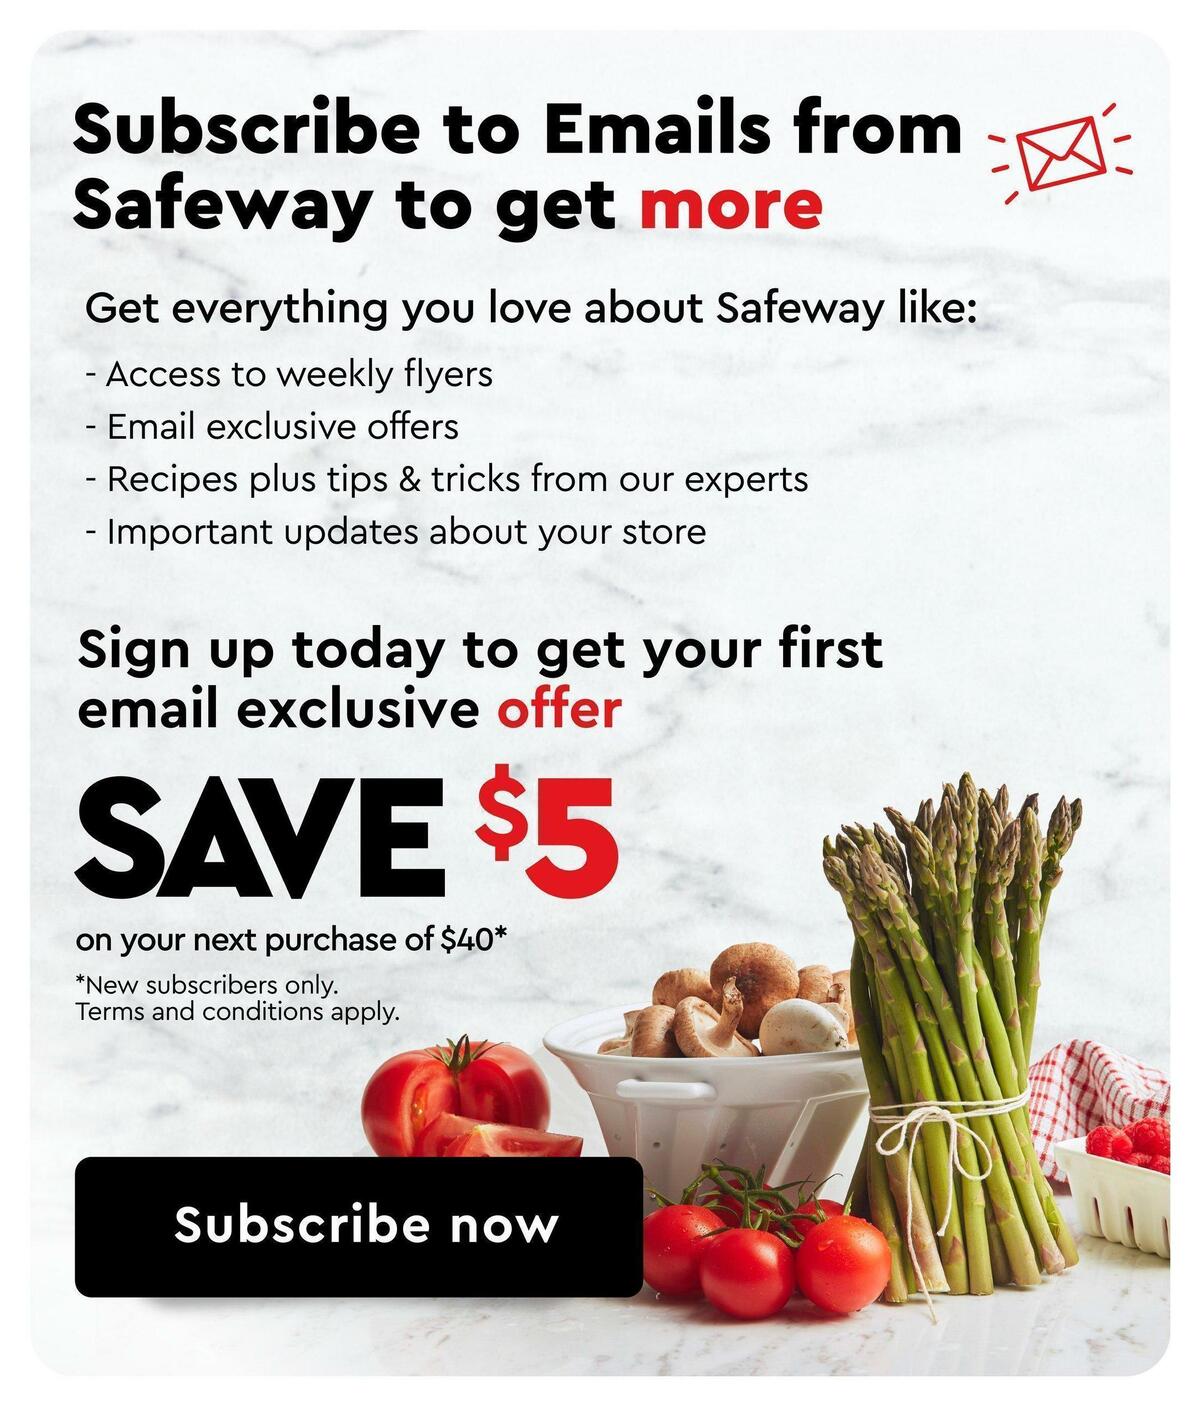 Safeway Flyer from July 7